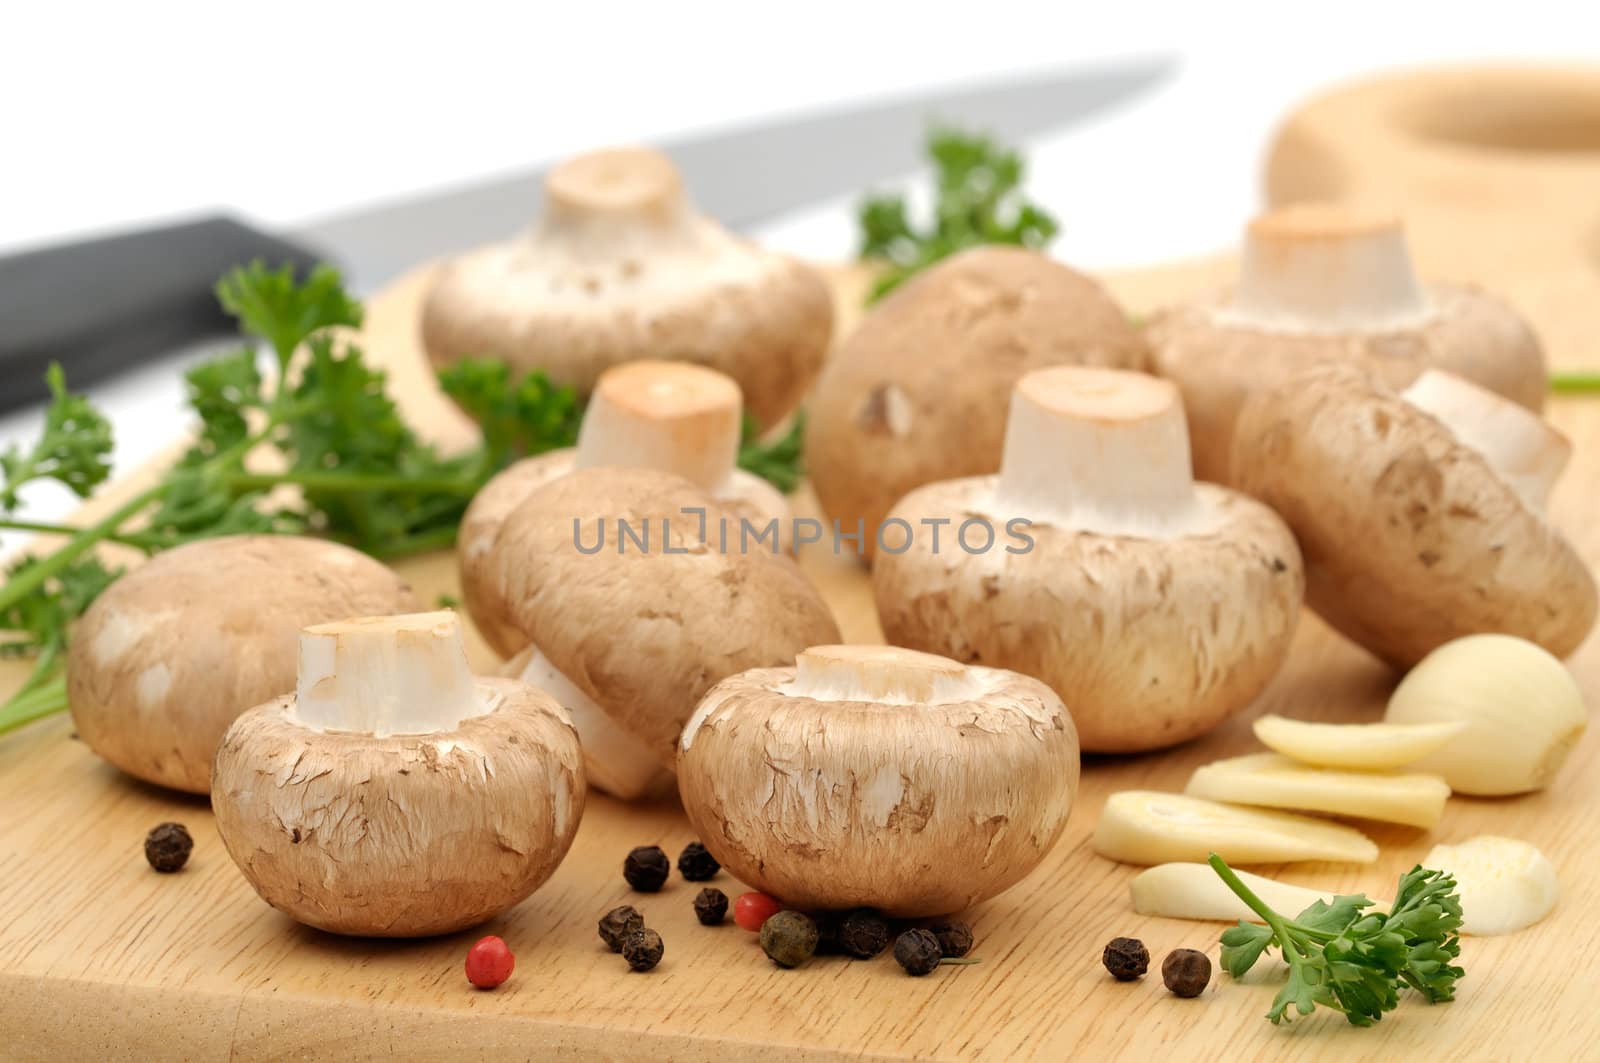 Raw ingredients on a wooden cutting board: mushrooms, parsley, whole pepper and garlic